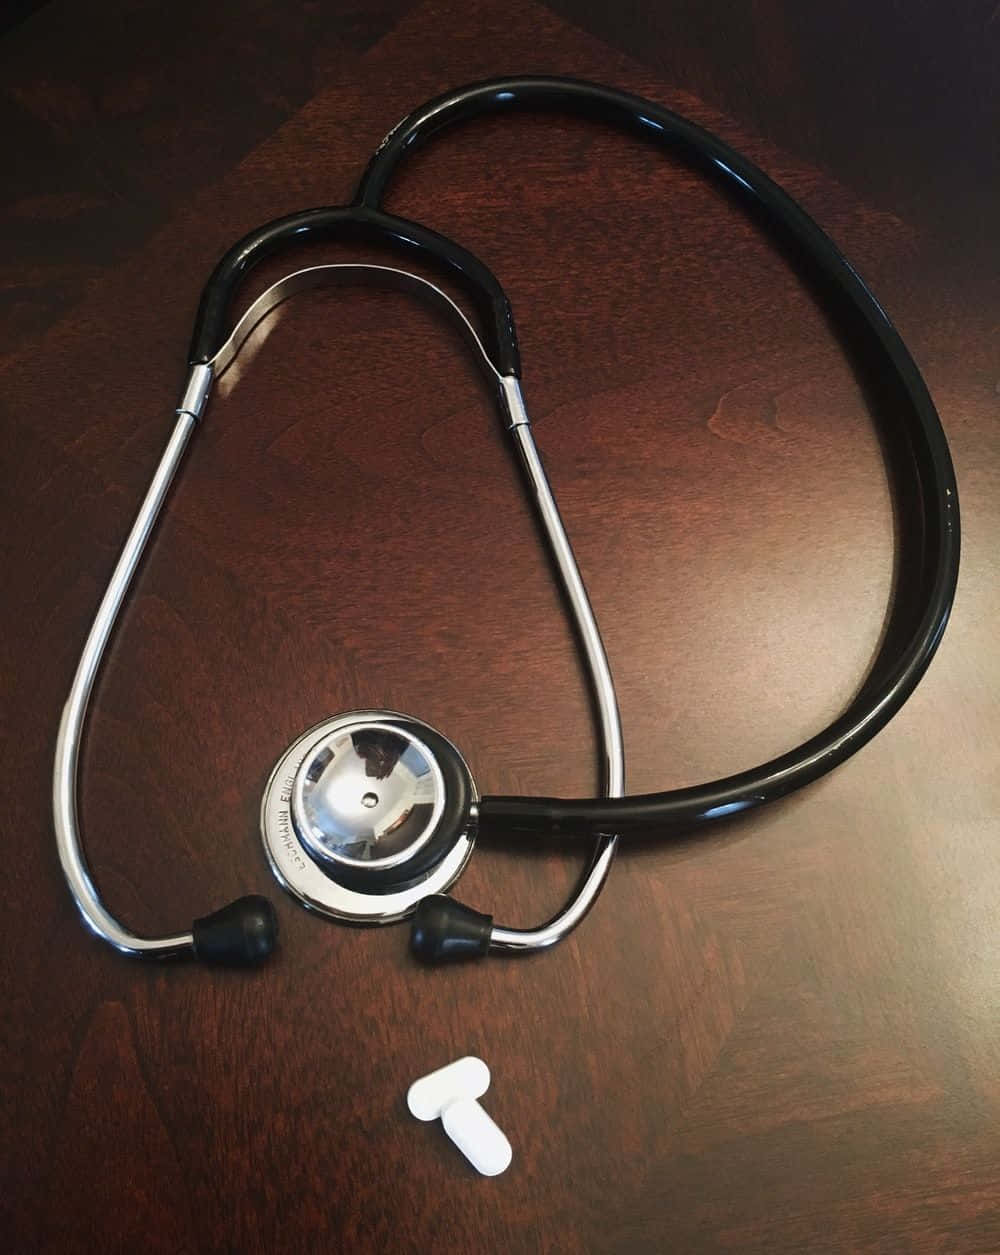 A stethoscope on a wooden surface